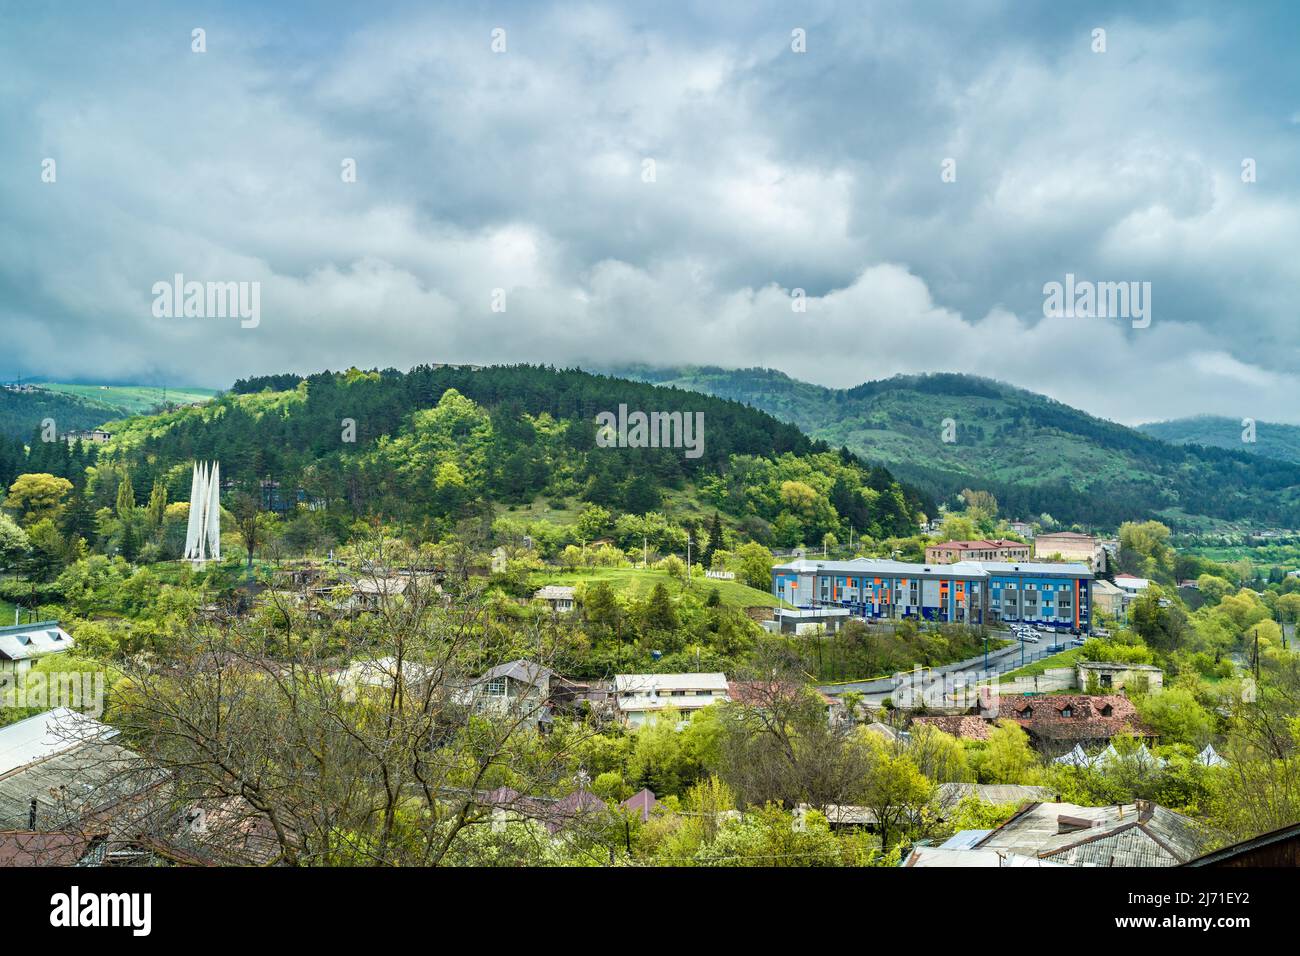 Dilijan, Armenia - May 5, 2022 - Clouds moving across the mountains near the city of Dilijan in Armenia Stock Photo